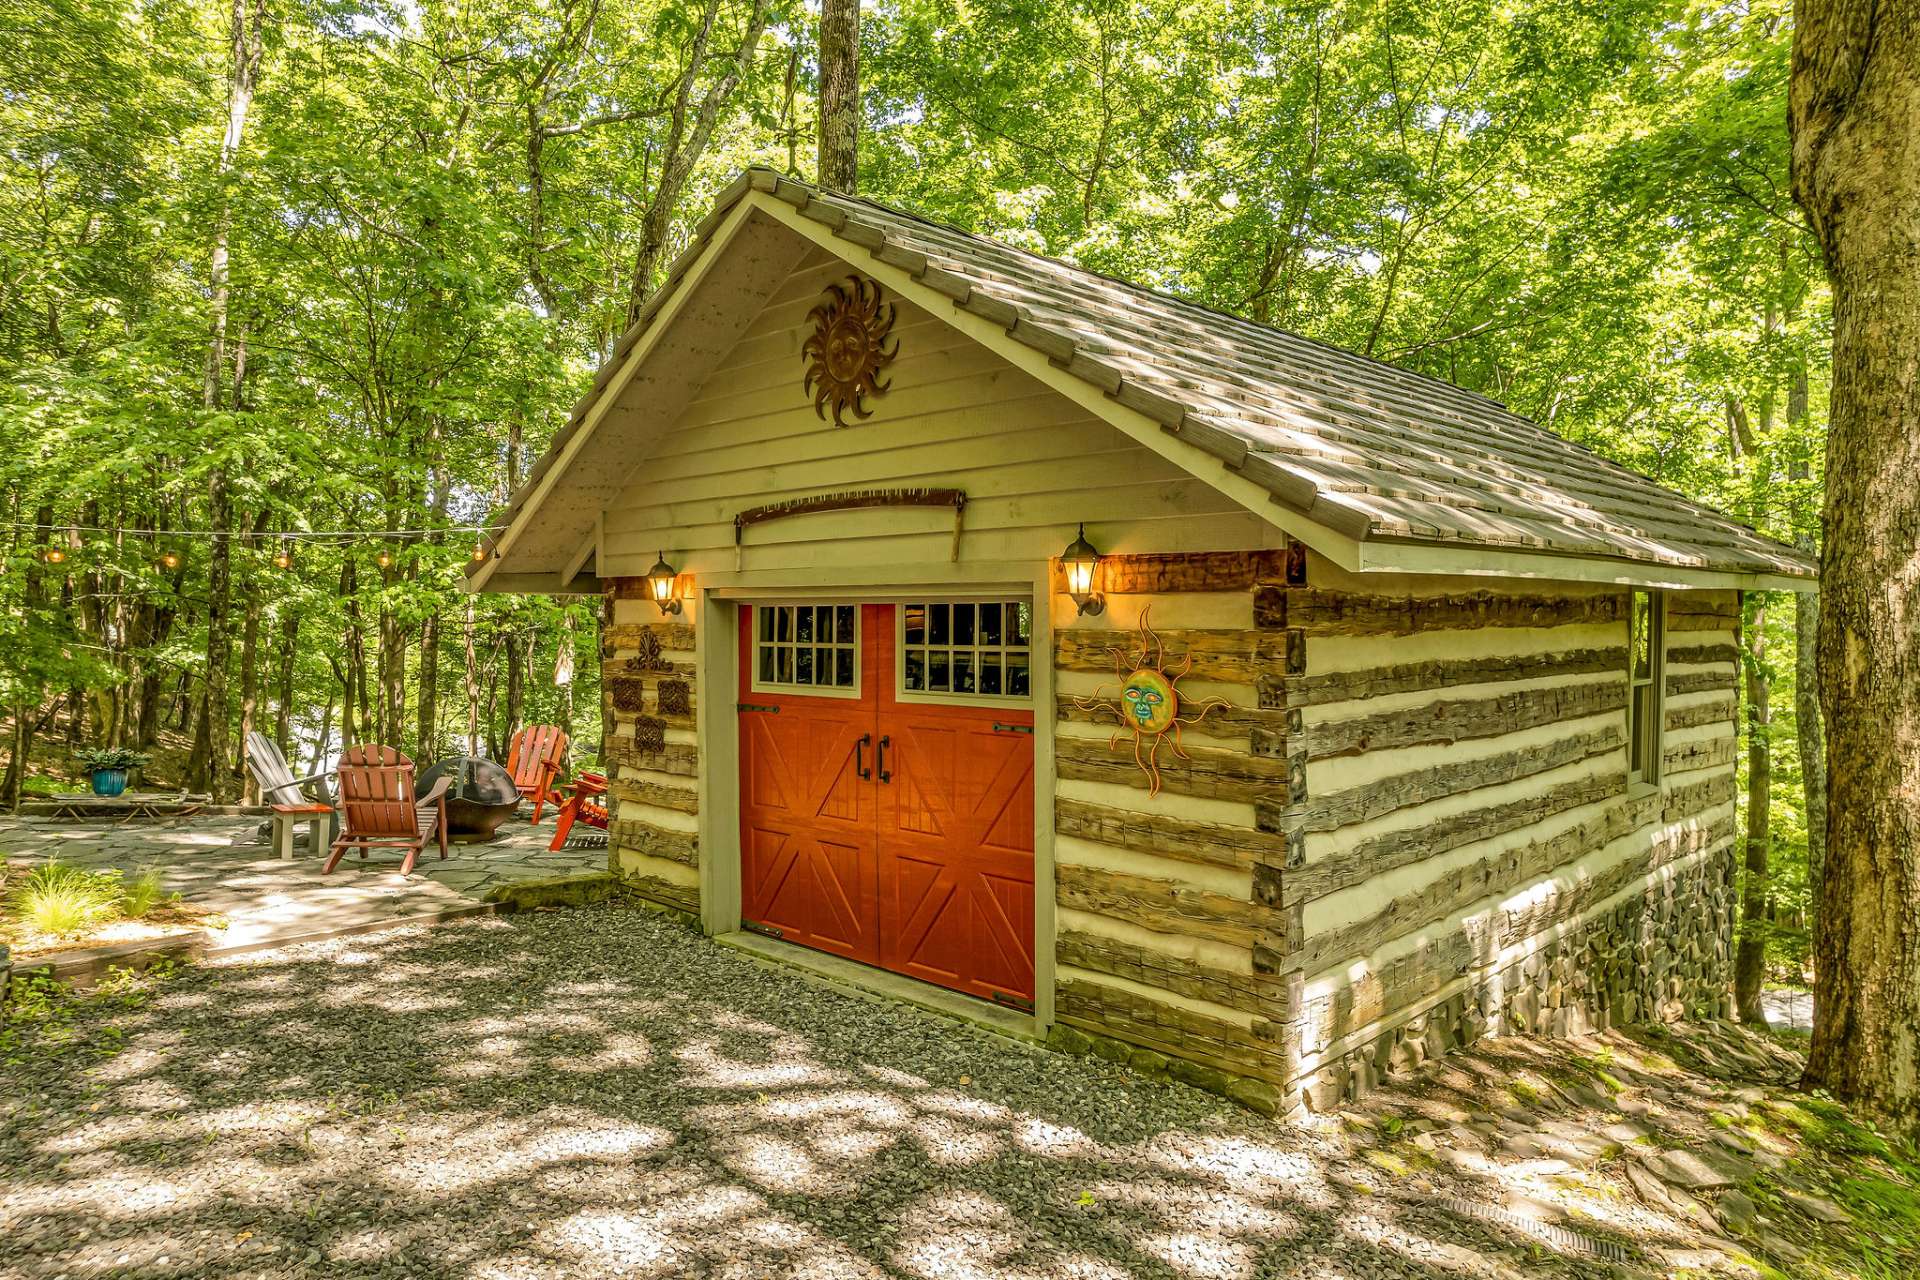 This appealing detached one car garage offers parking and extra storage for all your mountain toys.